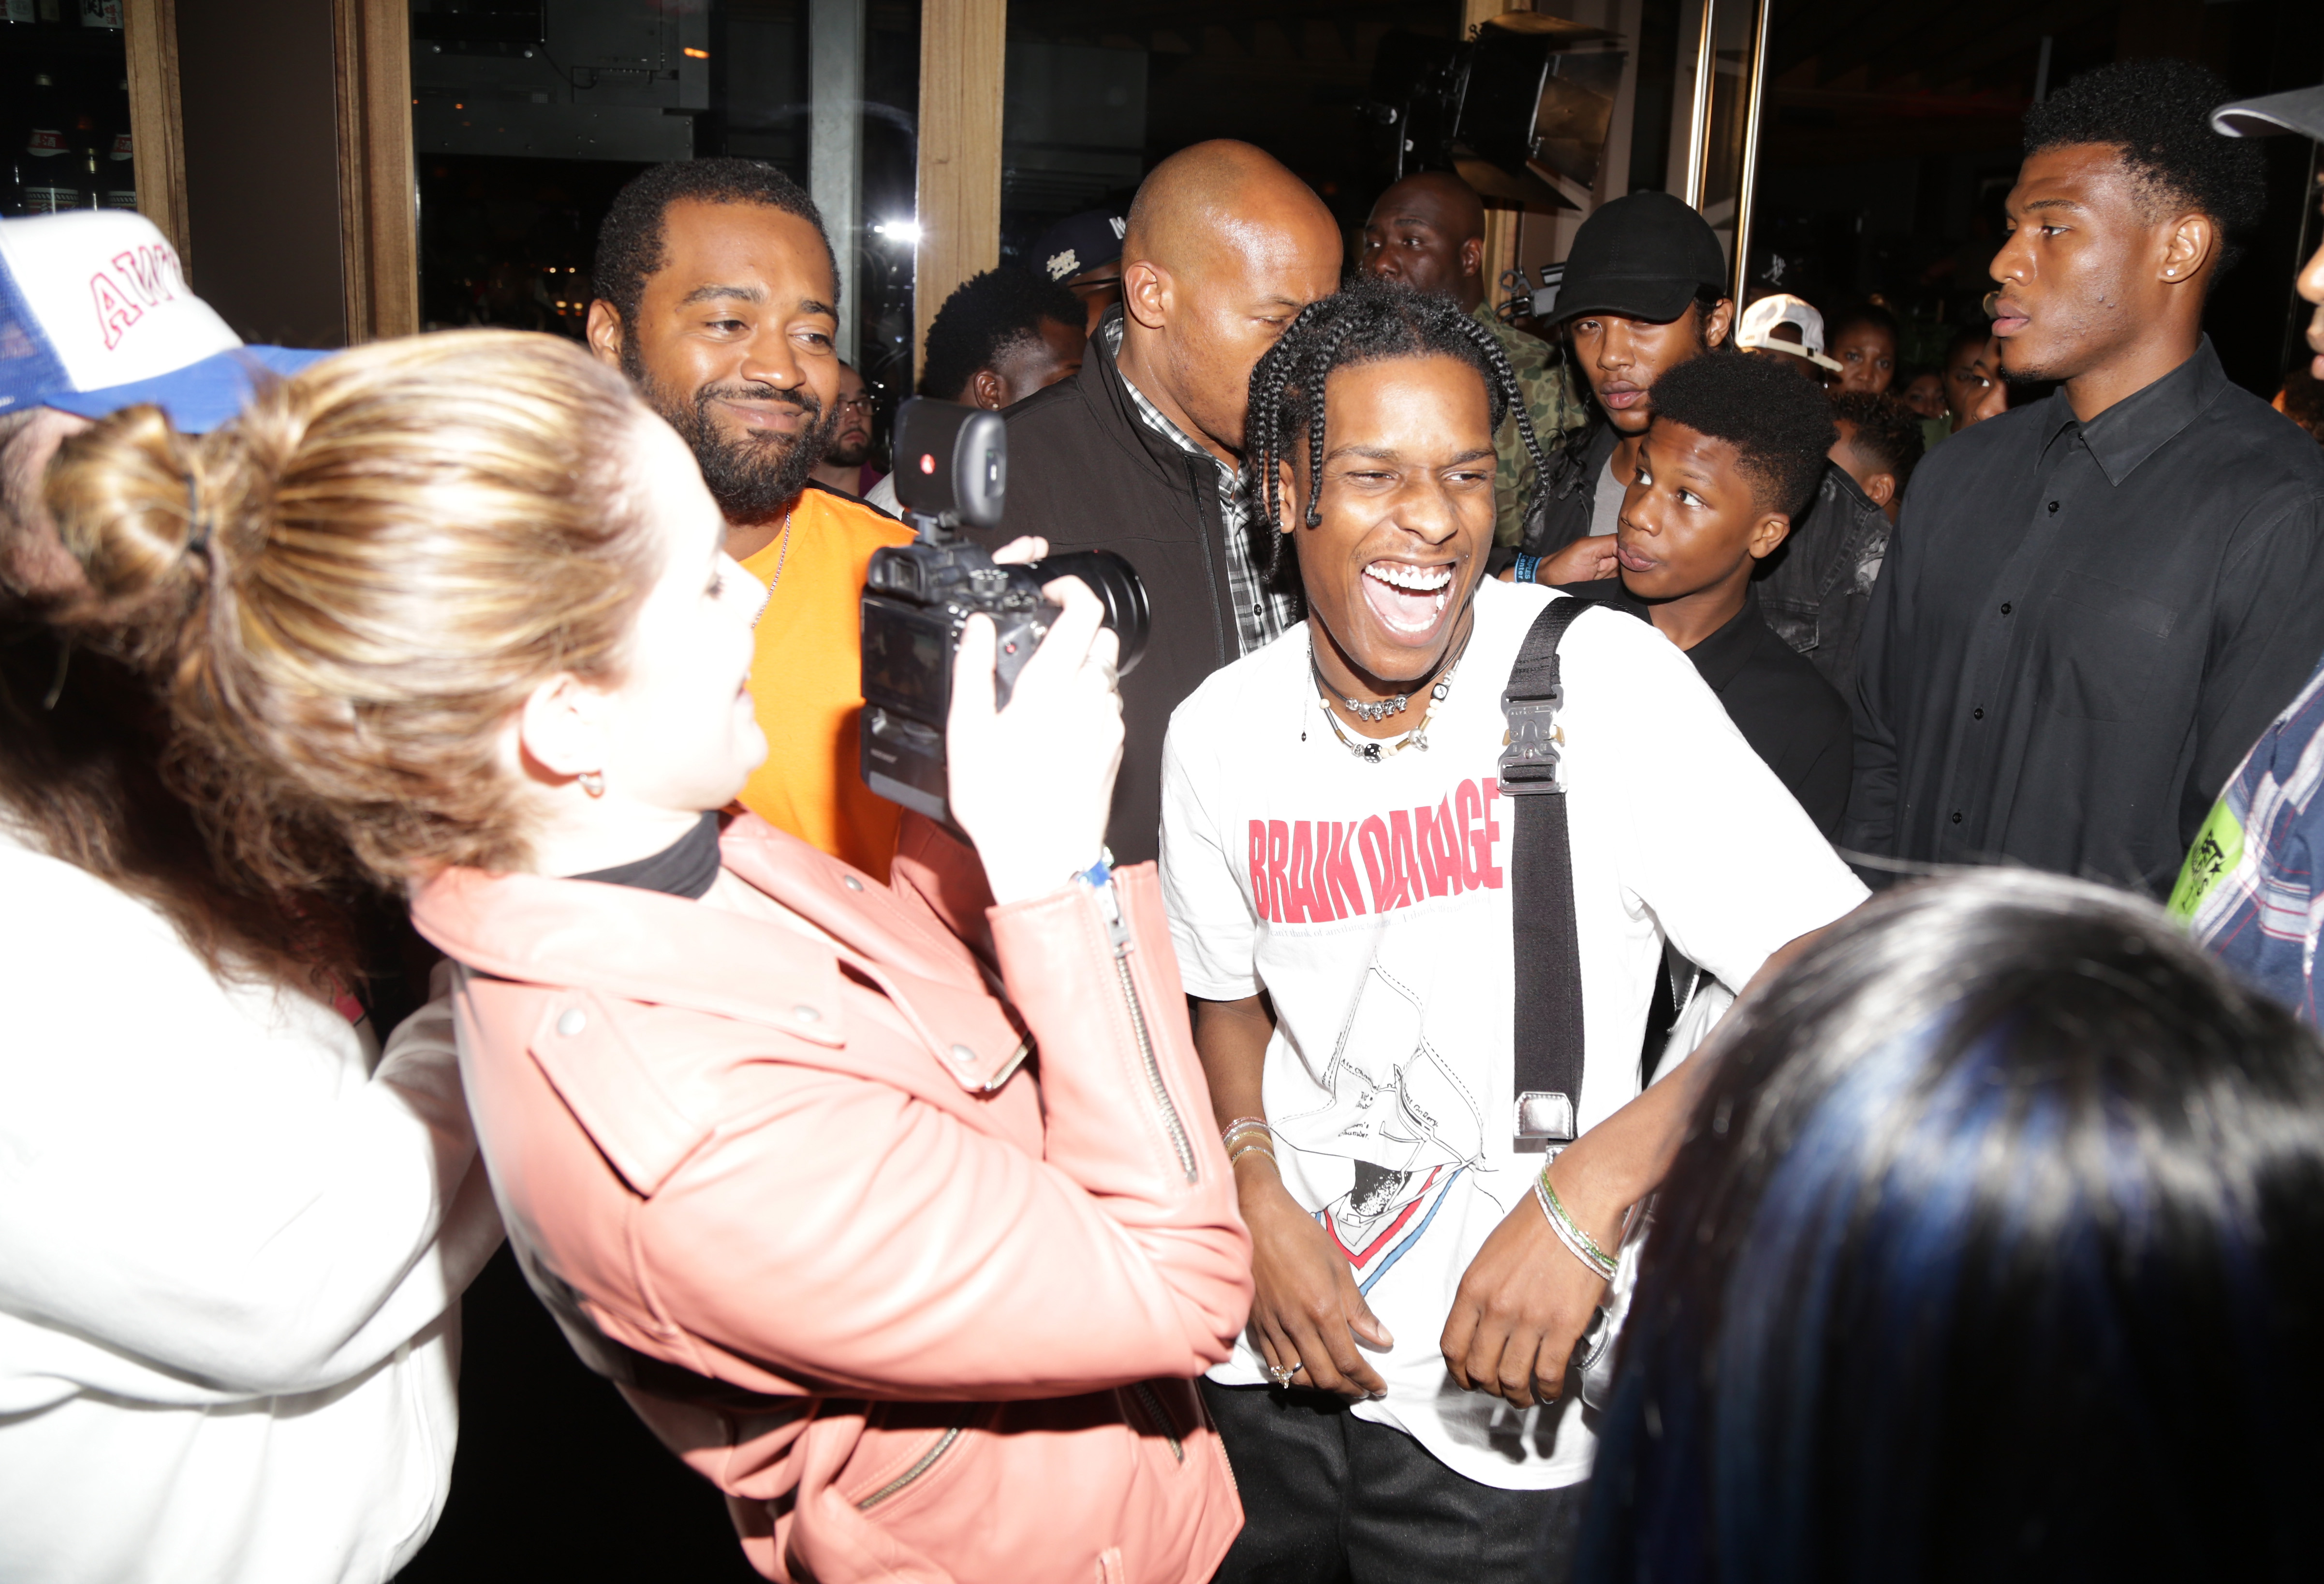 ASAP Rocky attends the IGA X BET Awards Party 2017 on June 24, 2017 in West Hollywood, California.